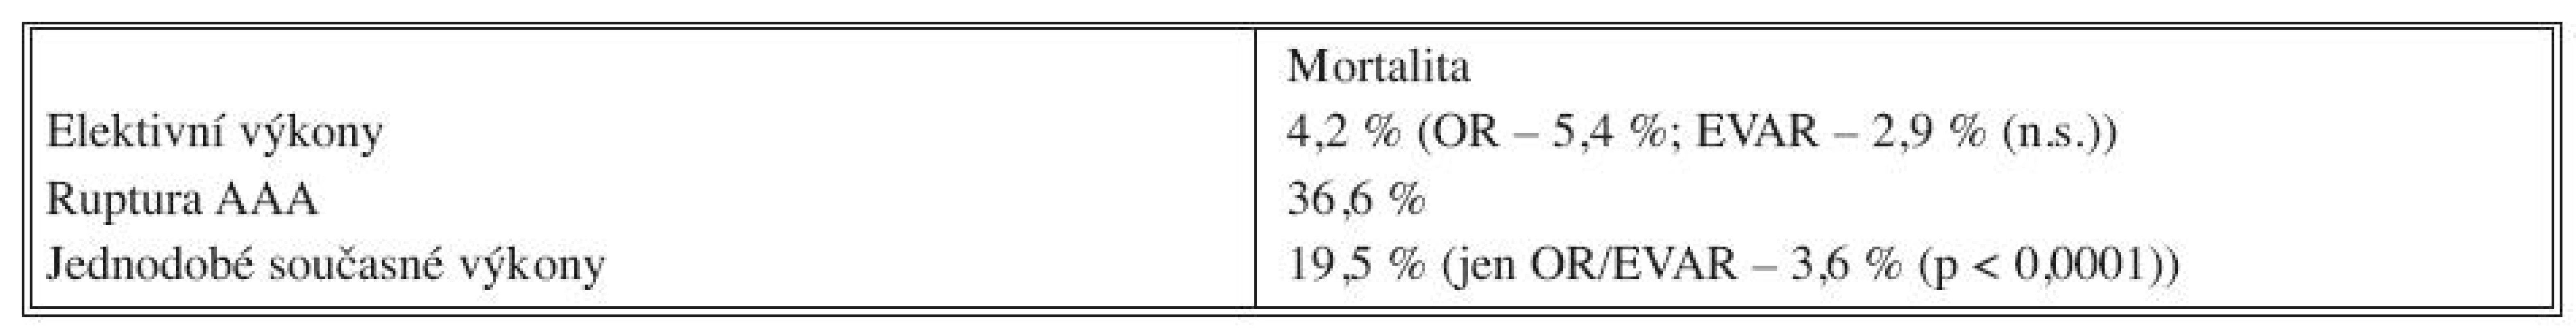 Třicetidenní mortalita nemocných s AAA
Tab. 2. 30-day mortality rate in patients with abdominal aortic aneurysms